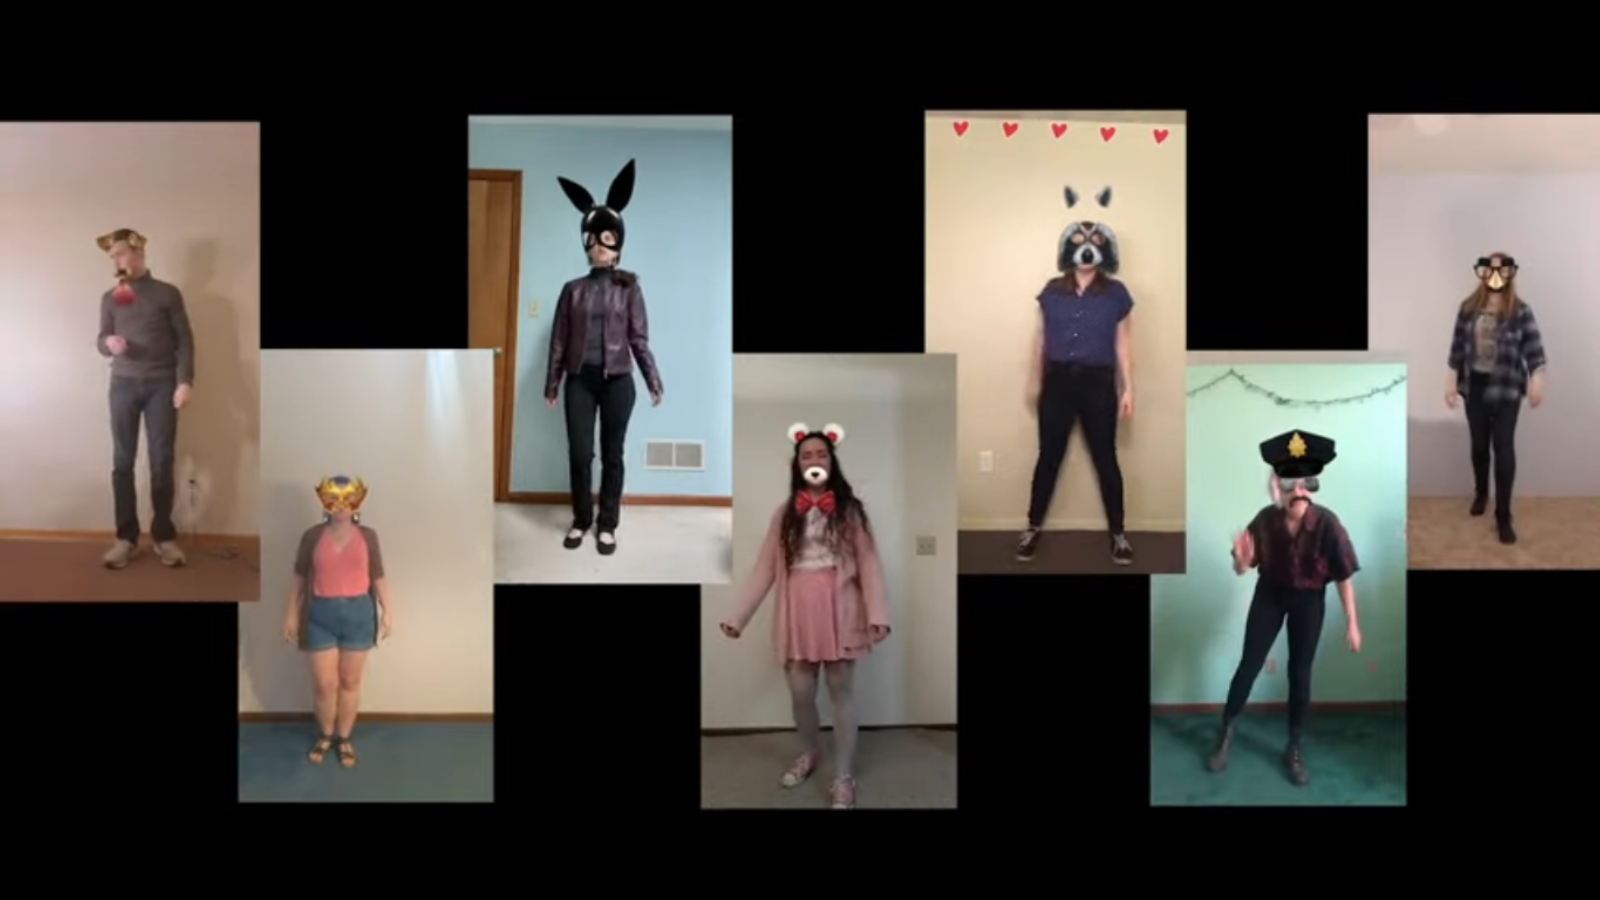 Several actors dancing with digital masks on, collaged on a screenshot